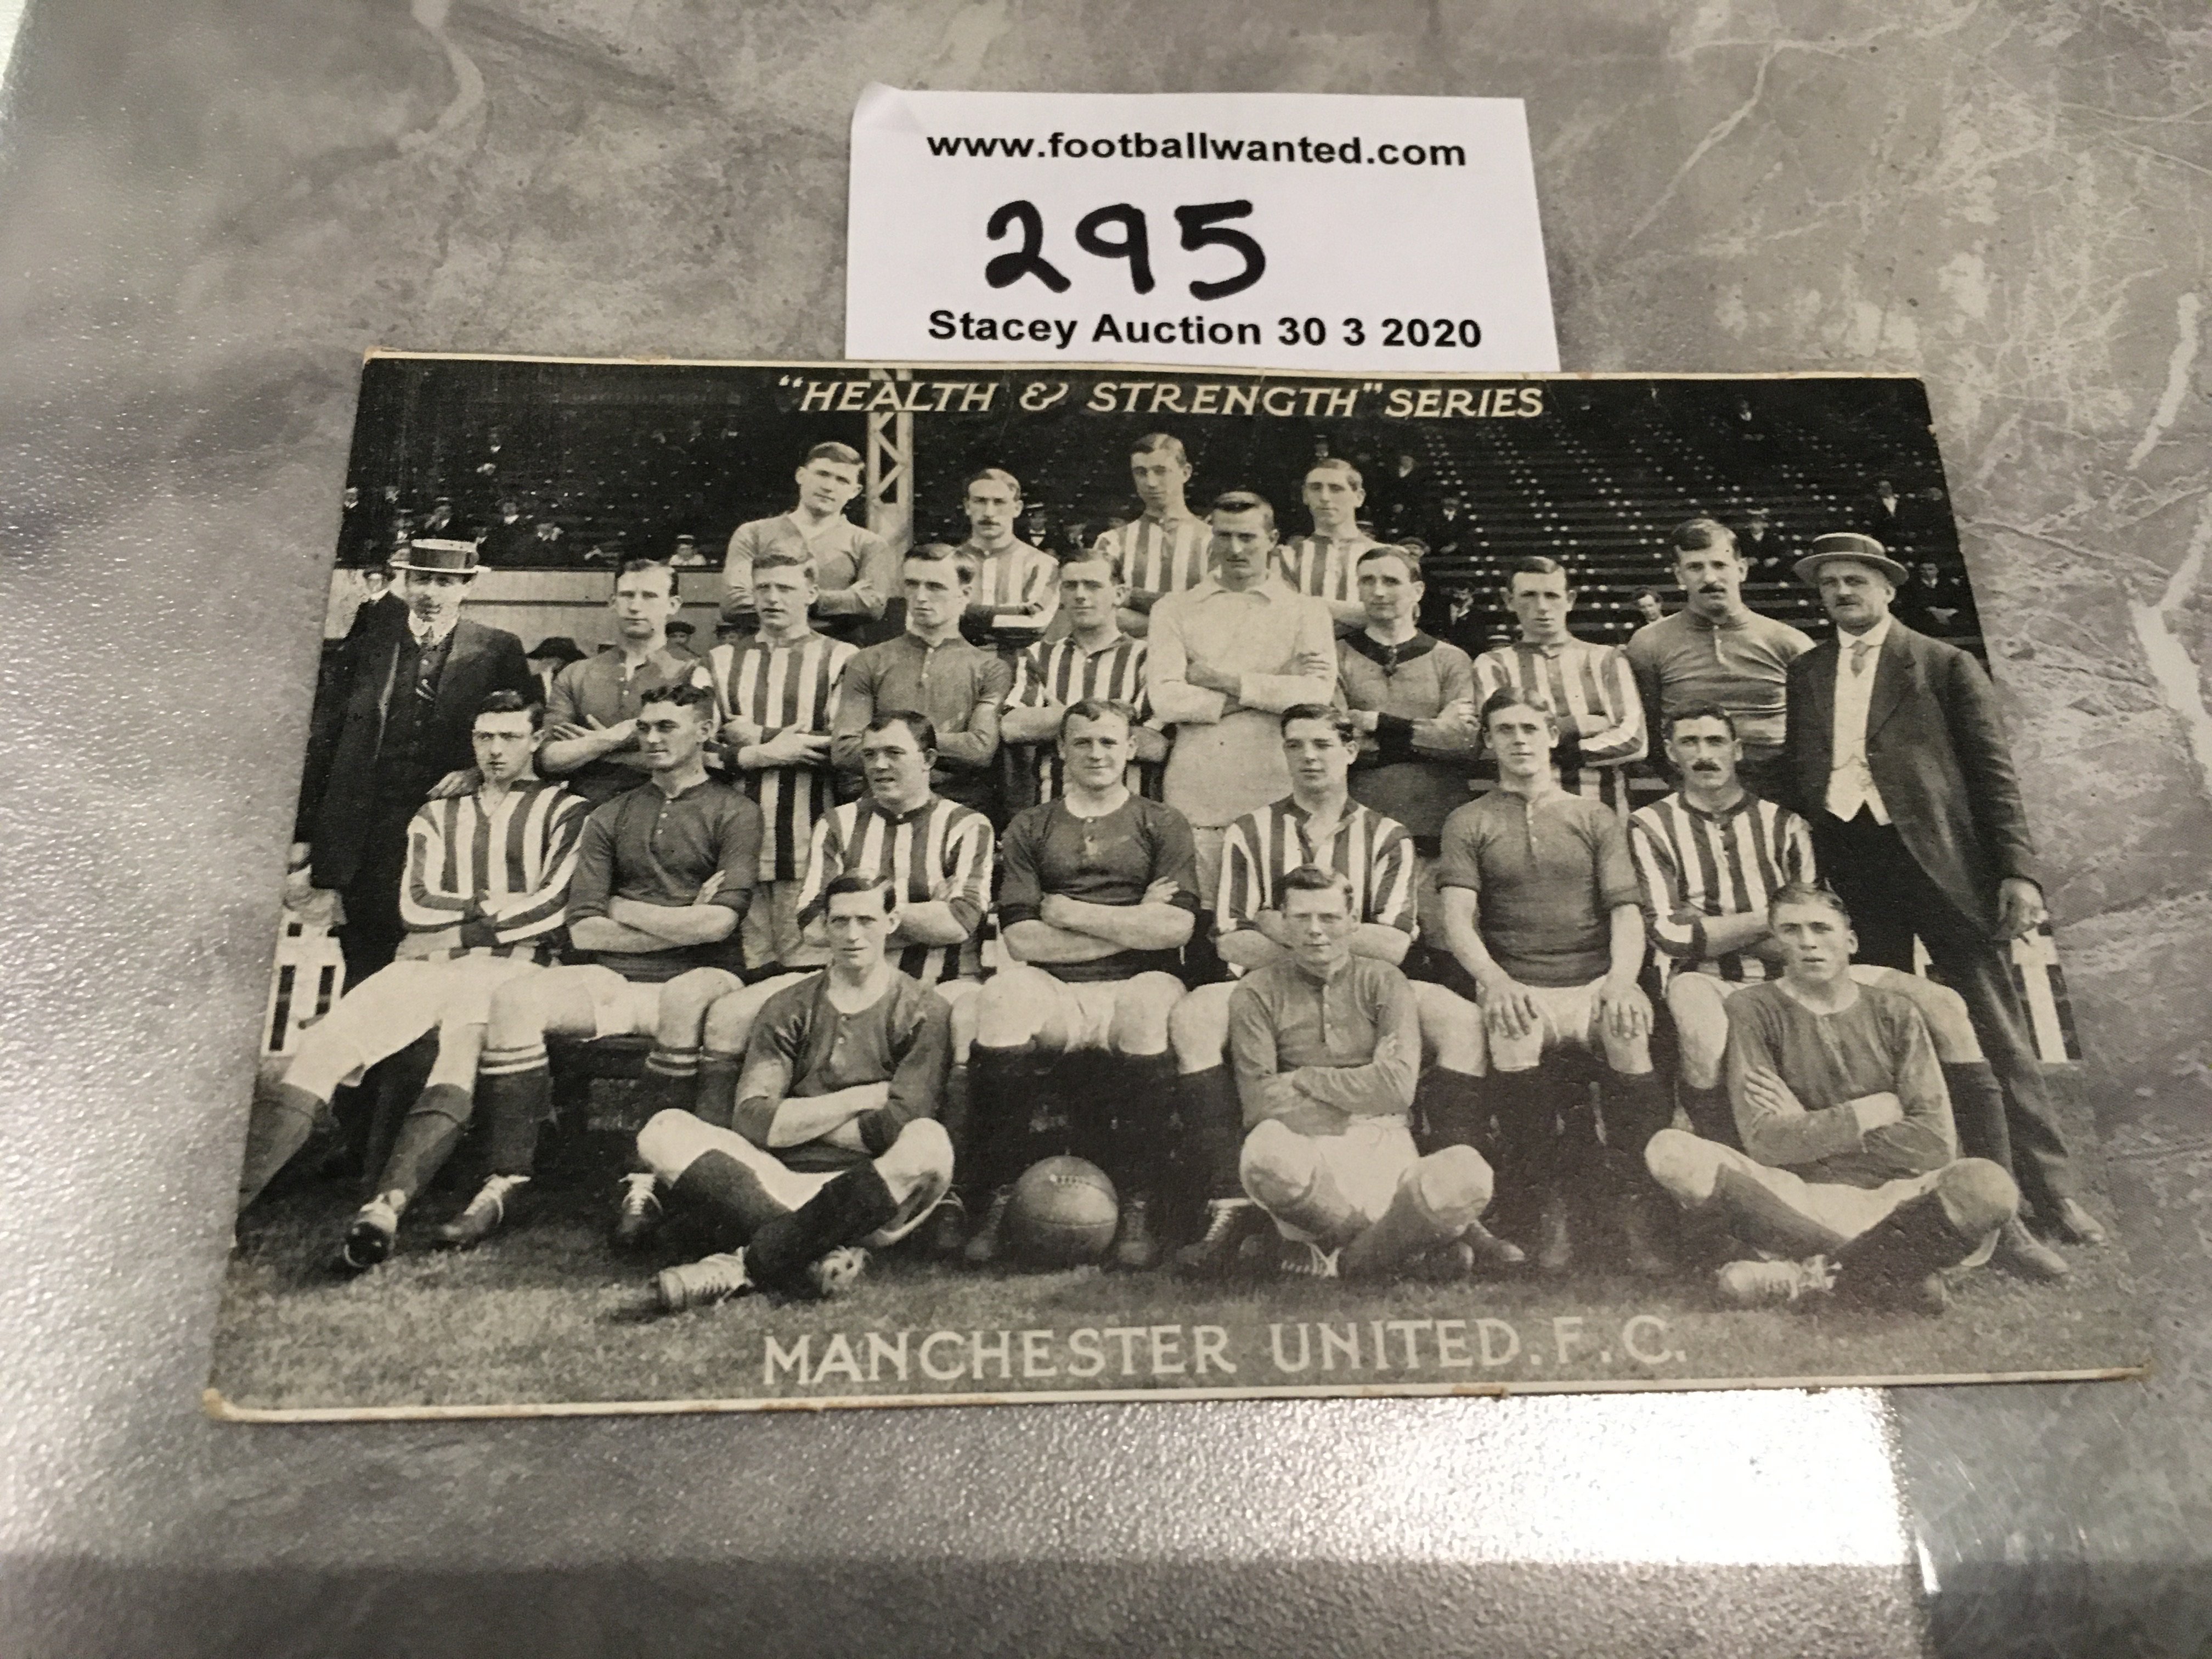 1910/11 Manchester United Football Postcard: Excellent condition team group from the Health and